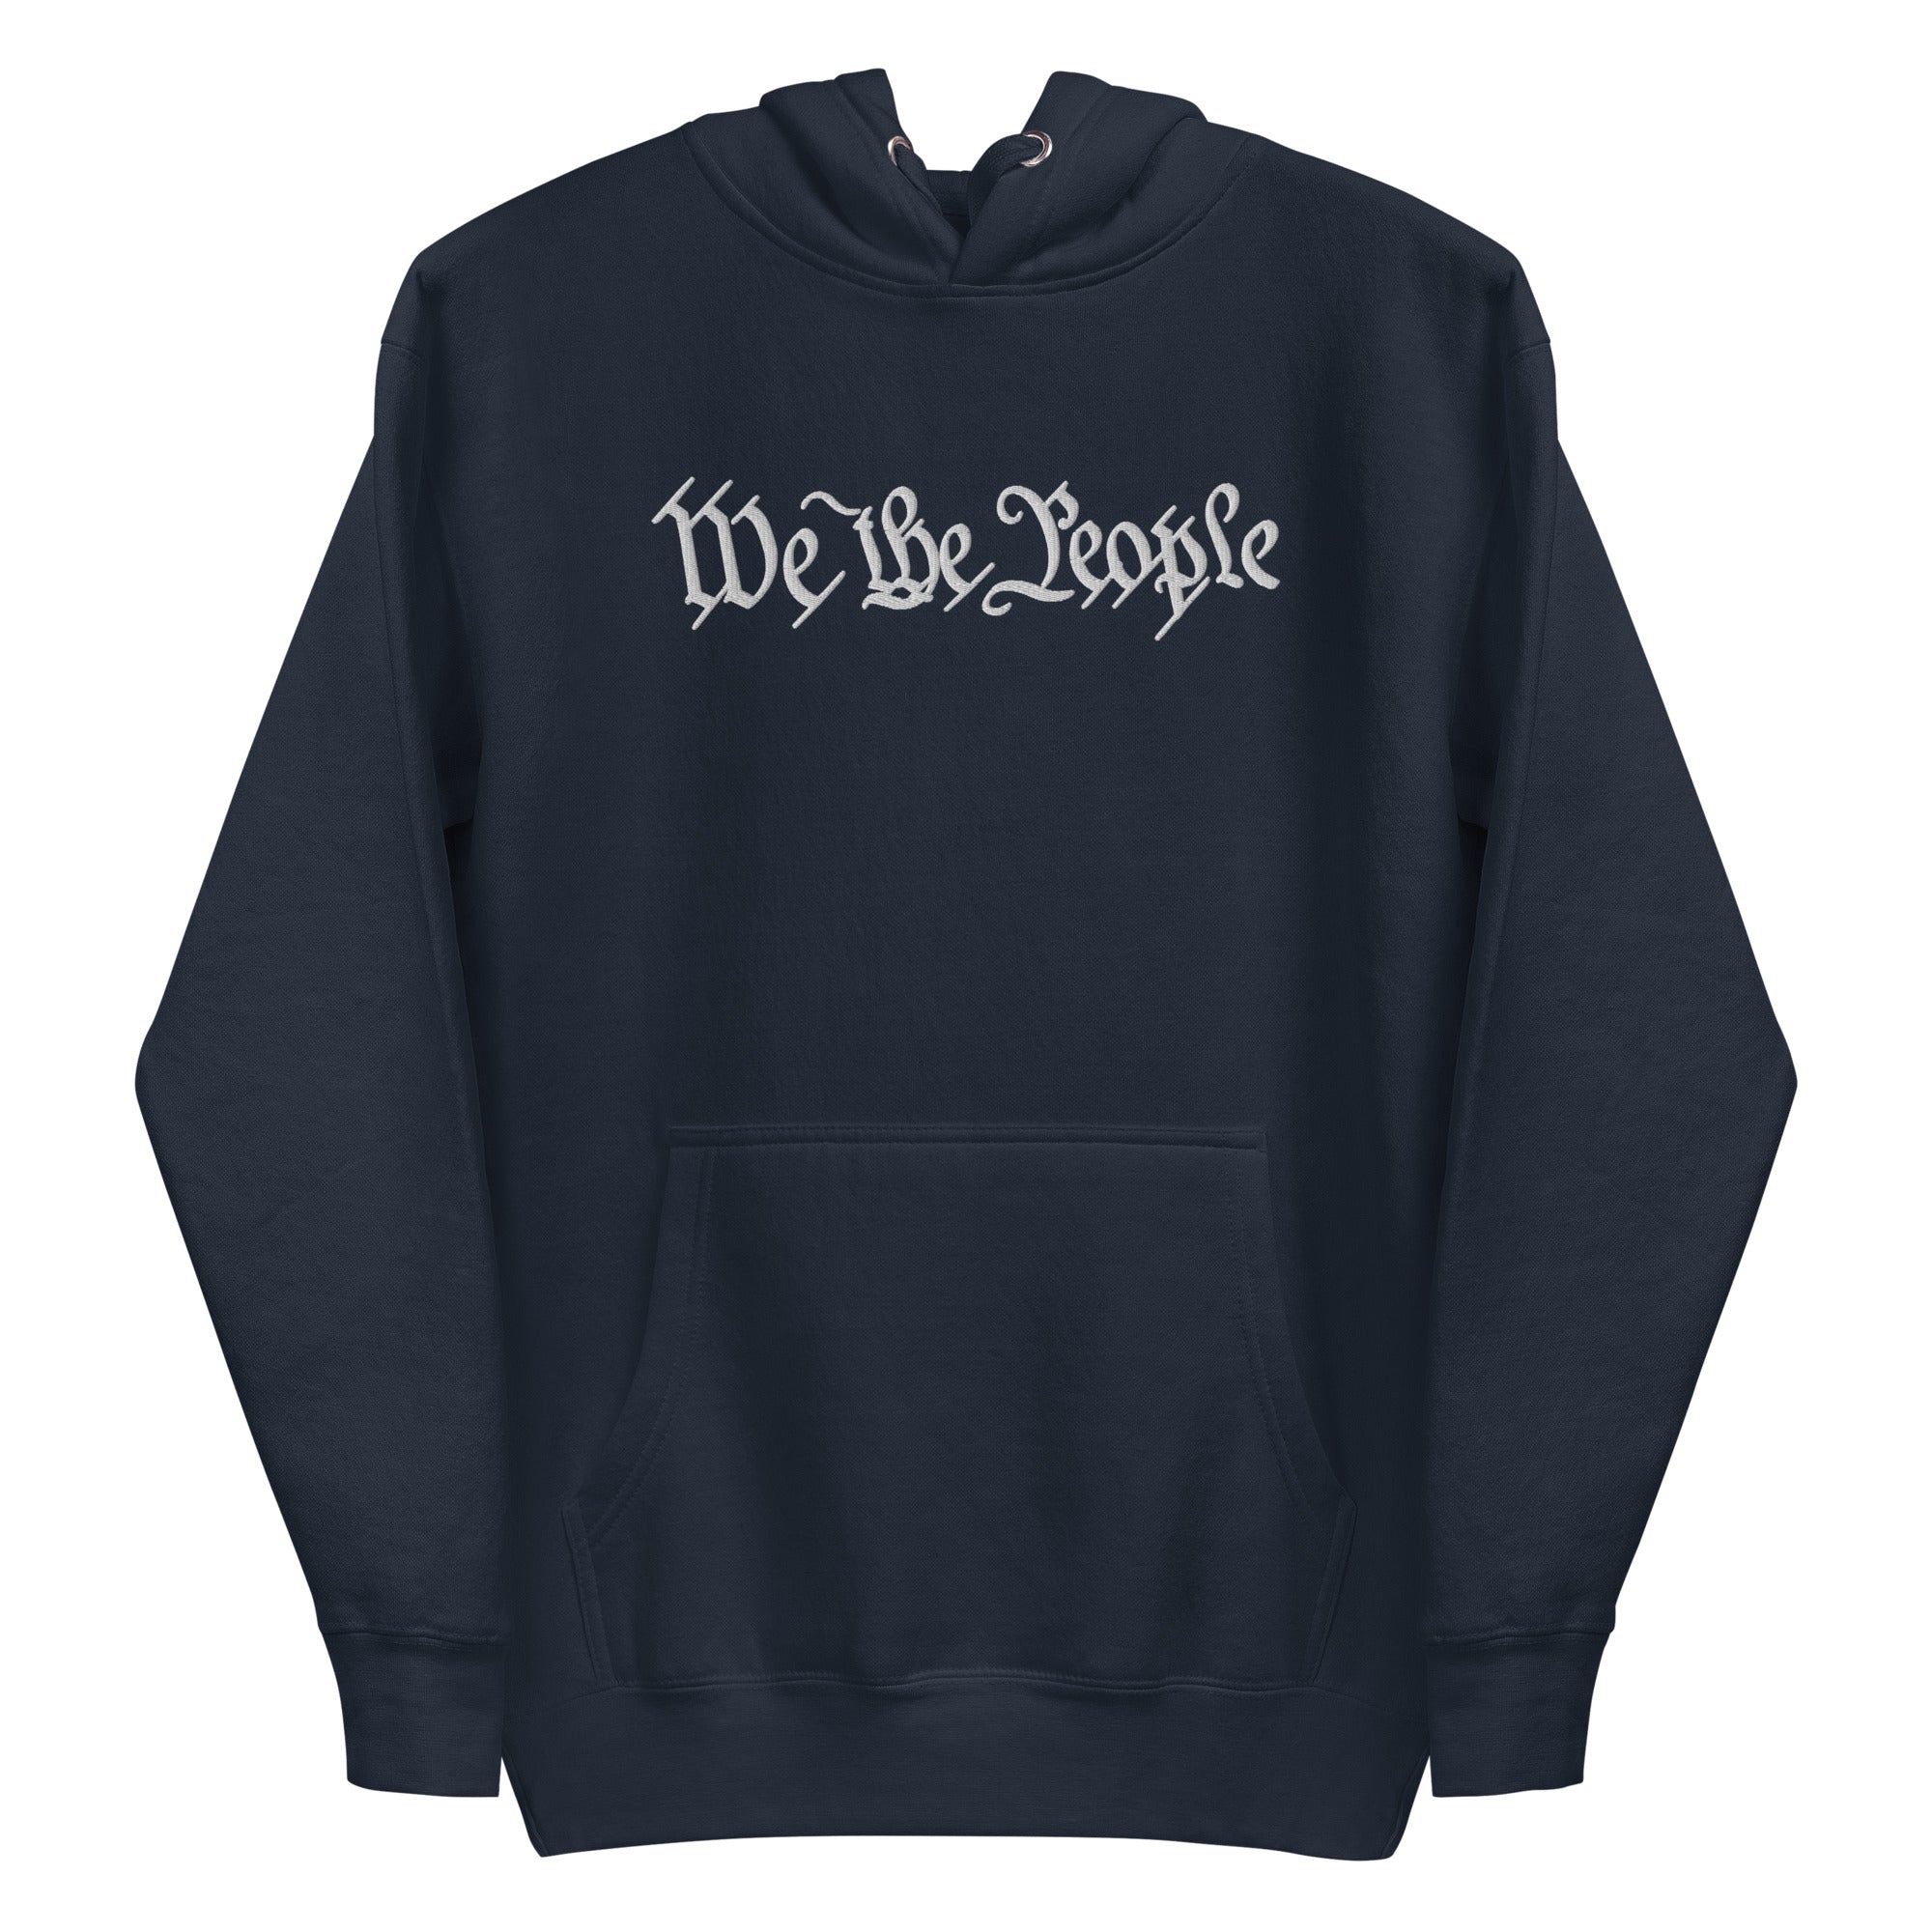 We the People Embroidered Hoodie